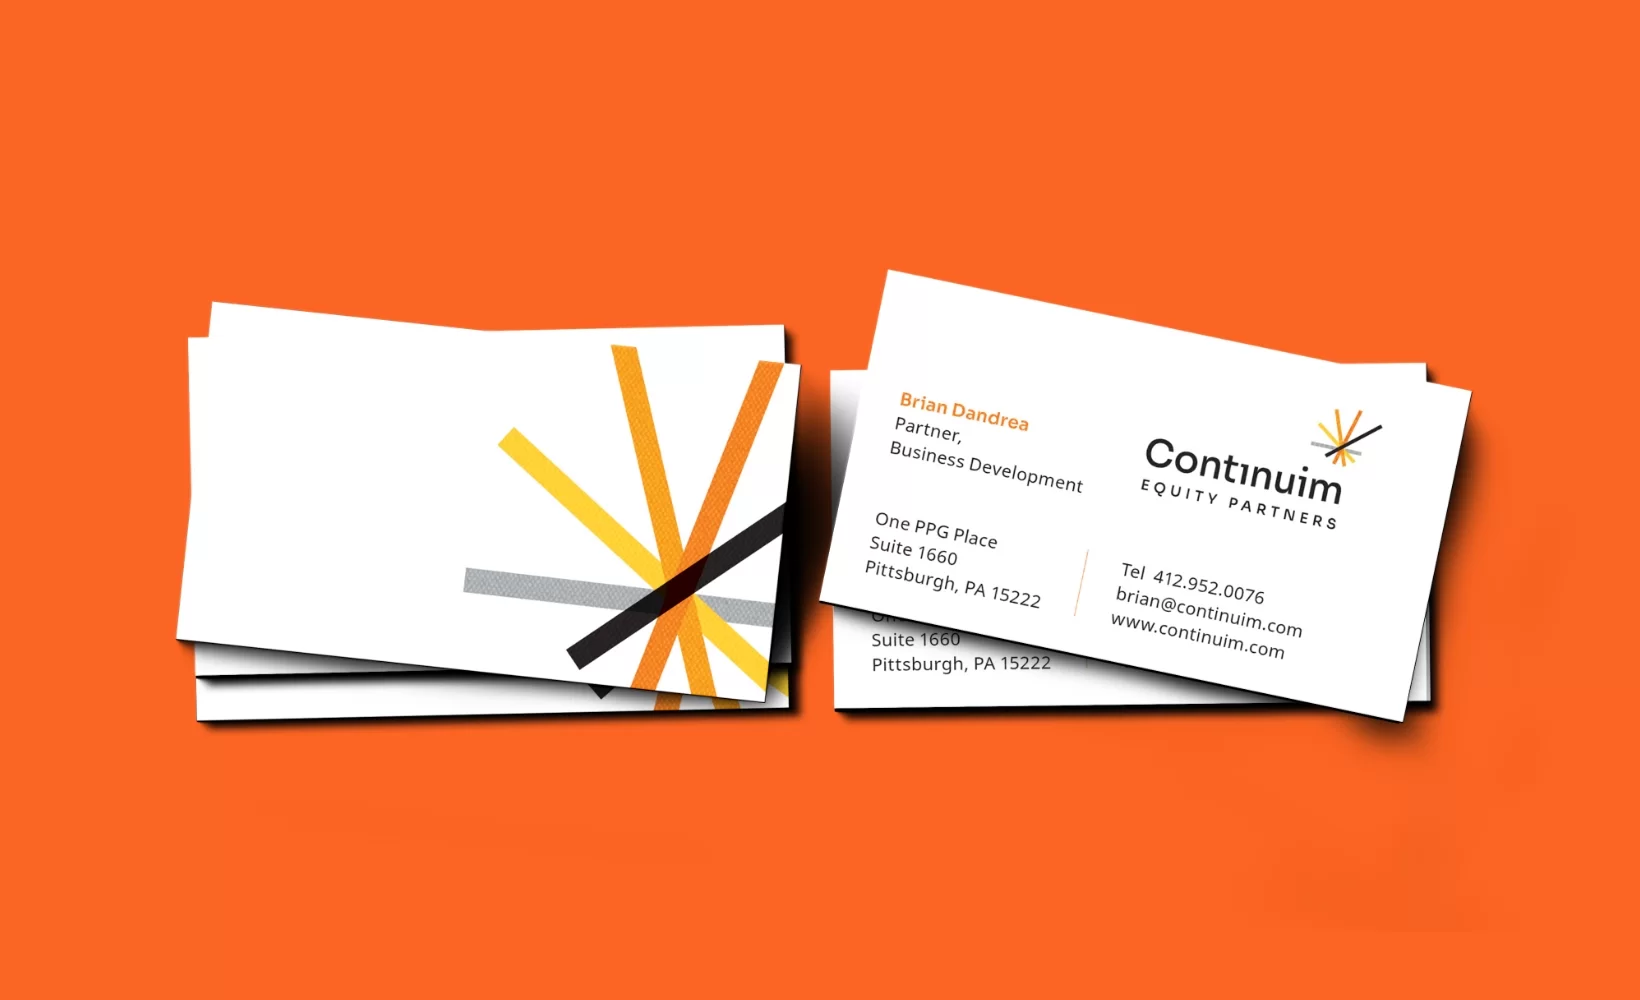 Rendered visual of Continuim Equity Partners business card with 'person, position, the office address, and contact information' on it.